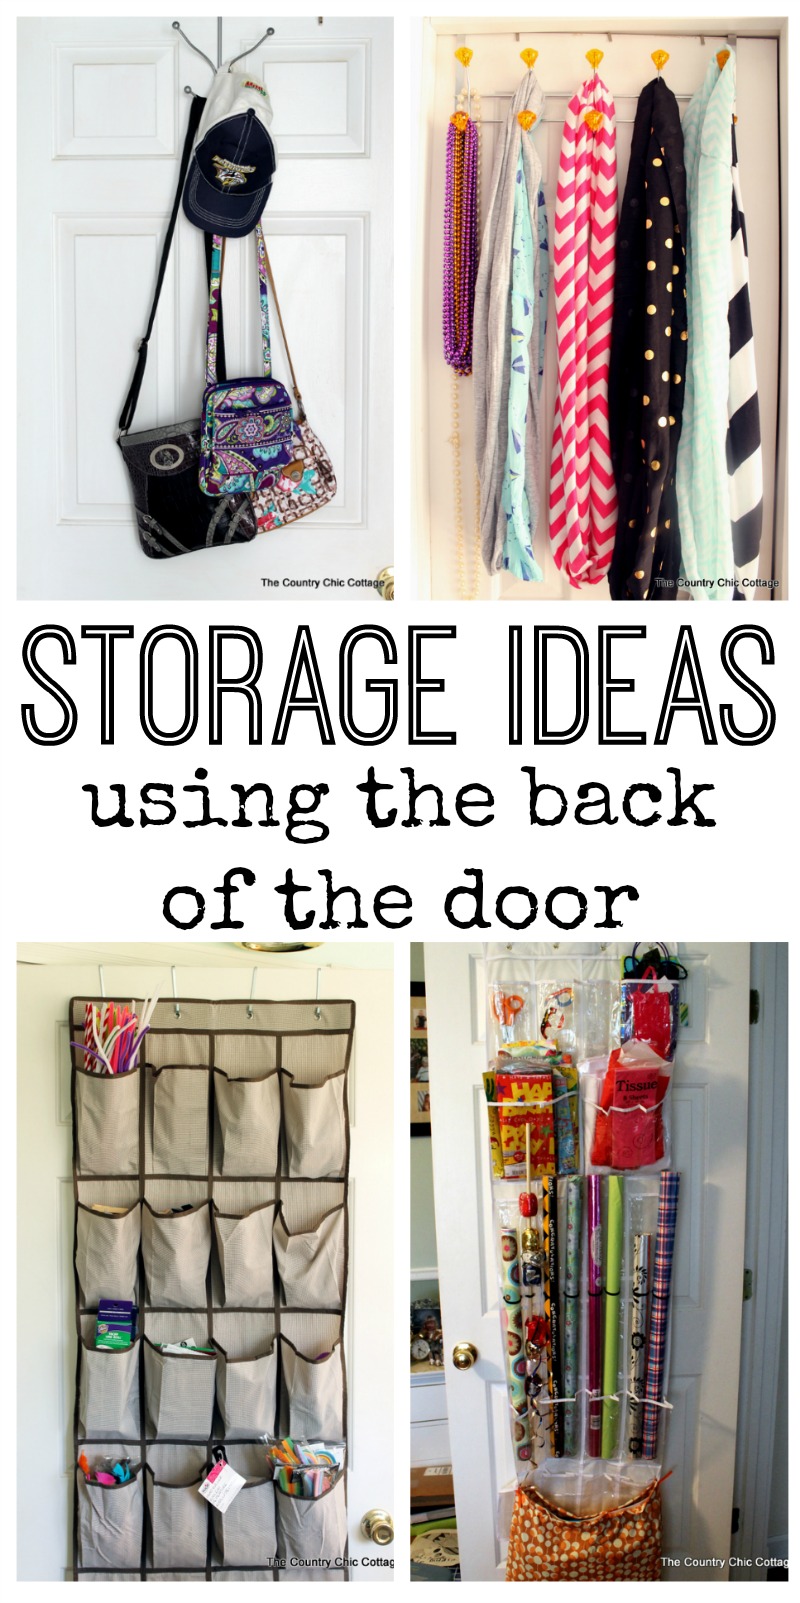 Storage Ideas: Using the back of the door for storage and organization in any home or apartment.